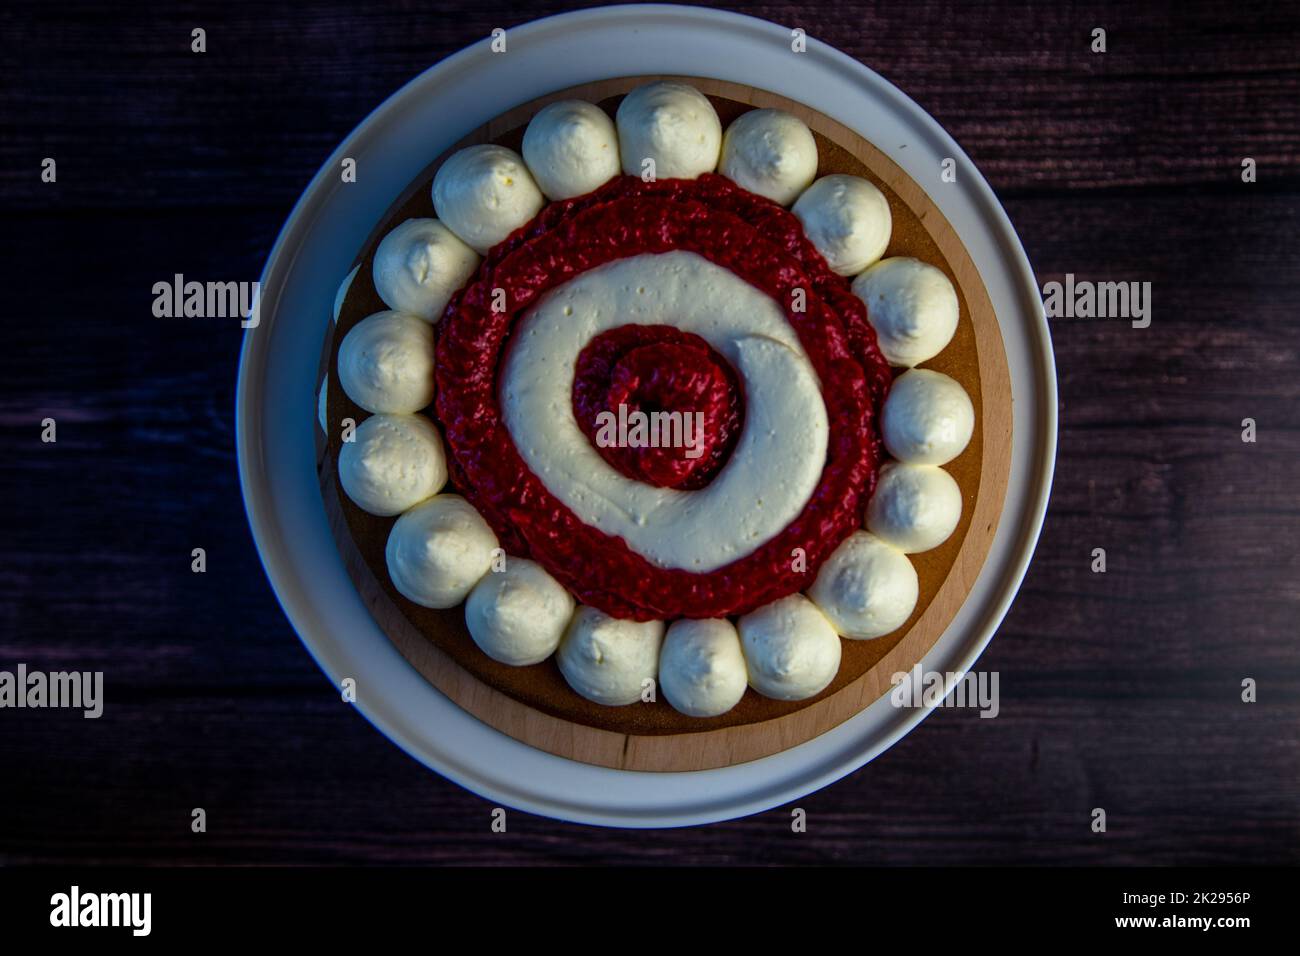 A cake with circles of white cream alternating with raspberry jam on a dark background, top view, close-up Stock Photo